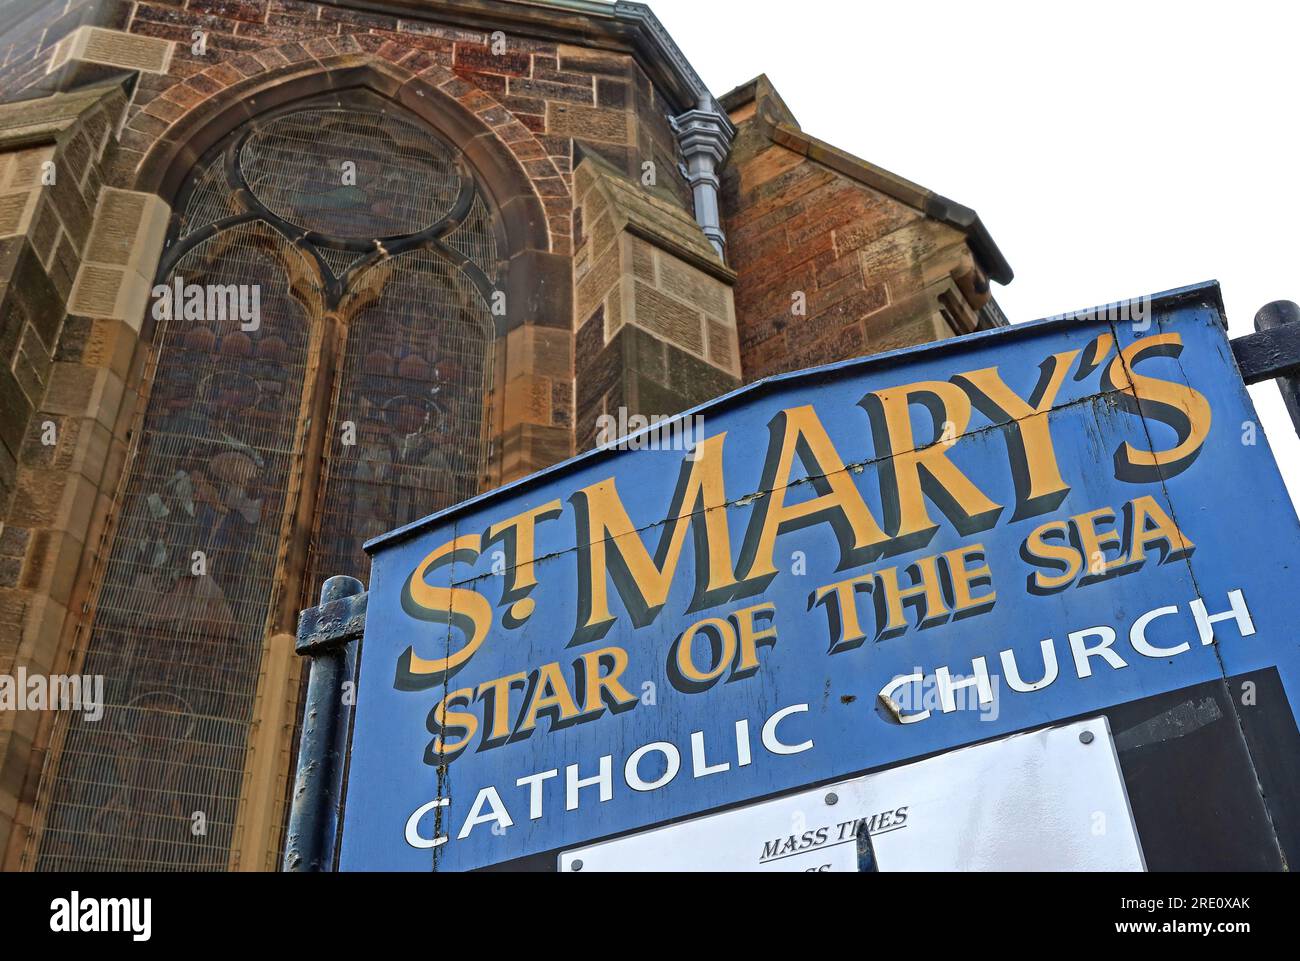 St Marys Star of the Sea, Catholic Church, 106 Constitution Street, Leith, Édimbourg, Écosse, EH6 6AW Banque D'Images